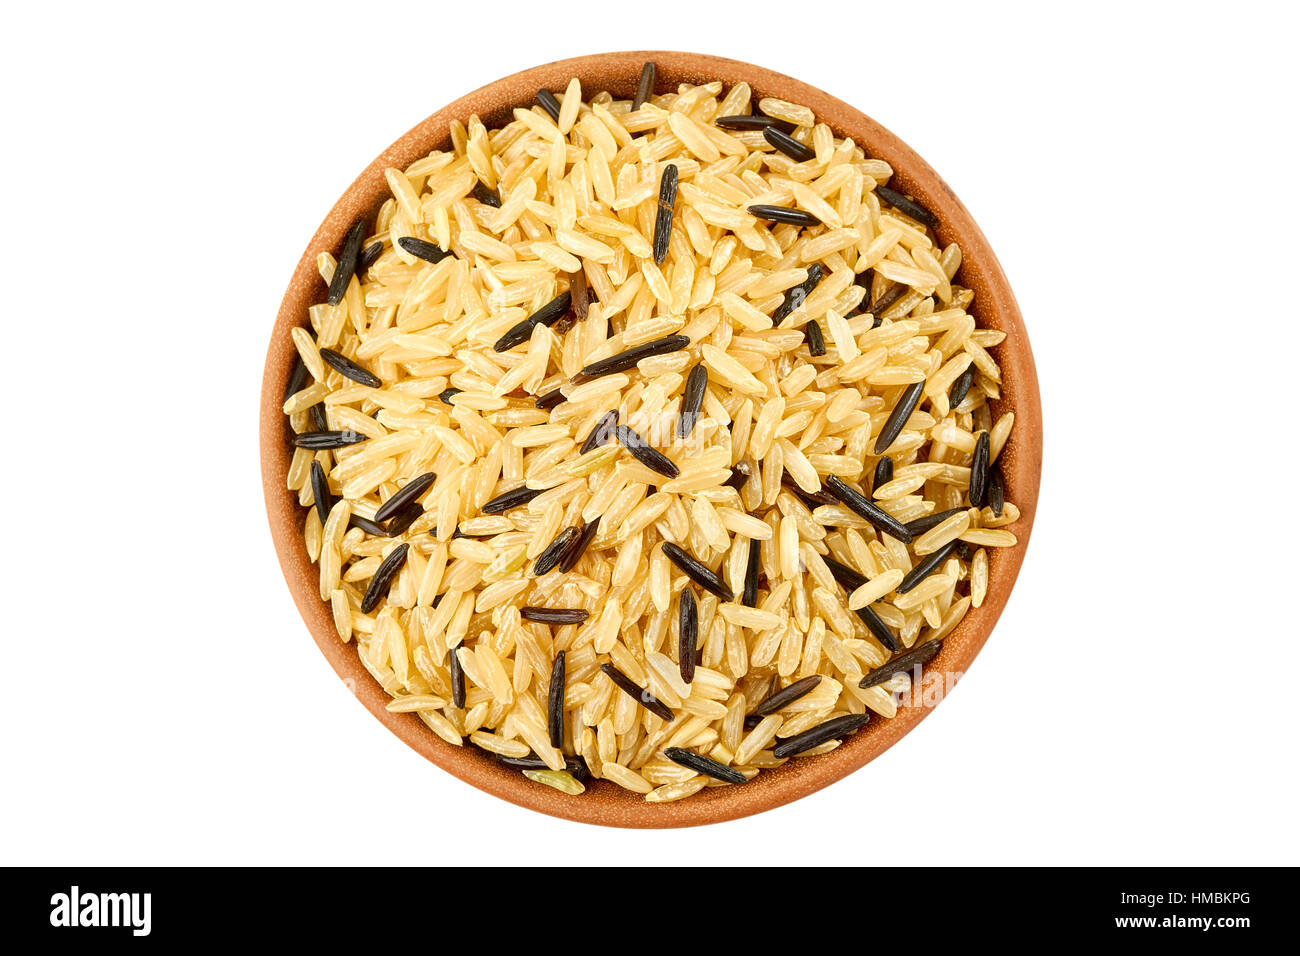 Brown and black rice in ceramic bowl on white Stock Photo